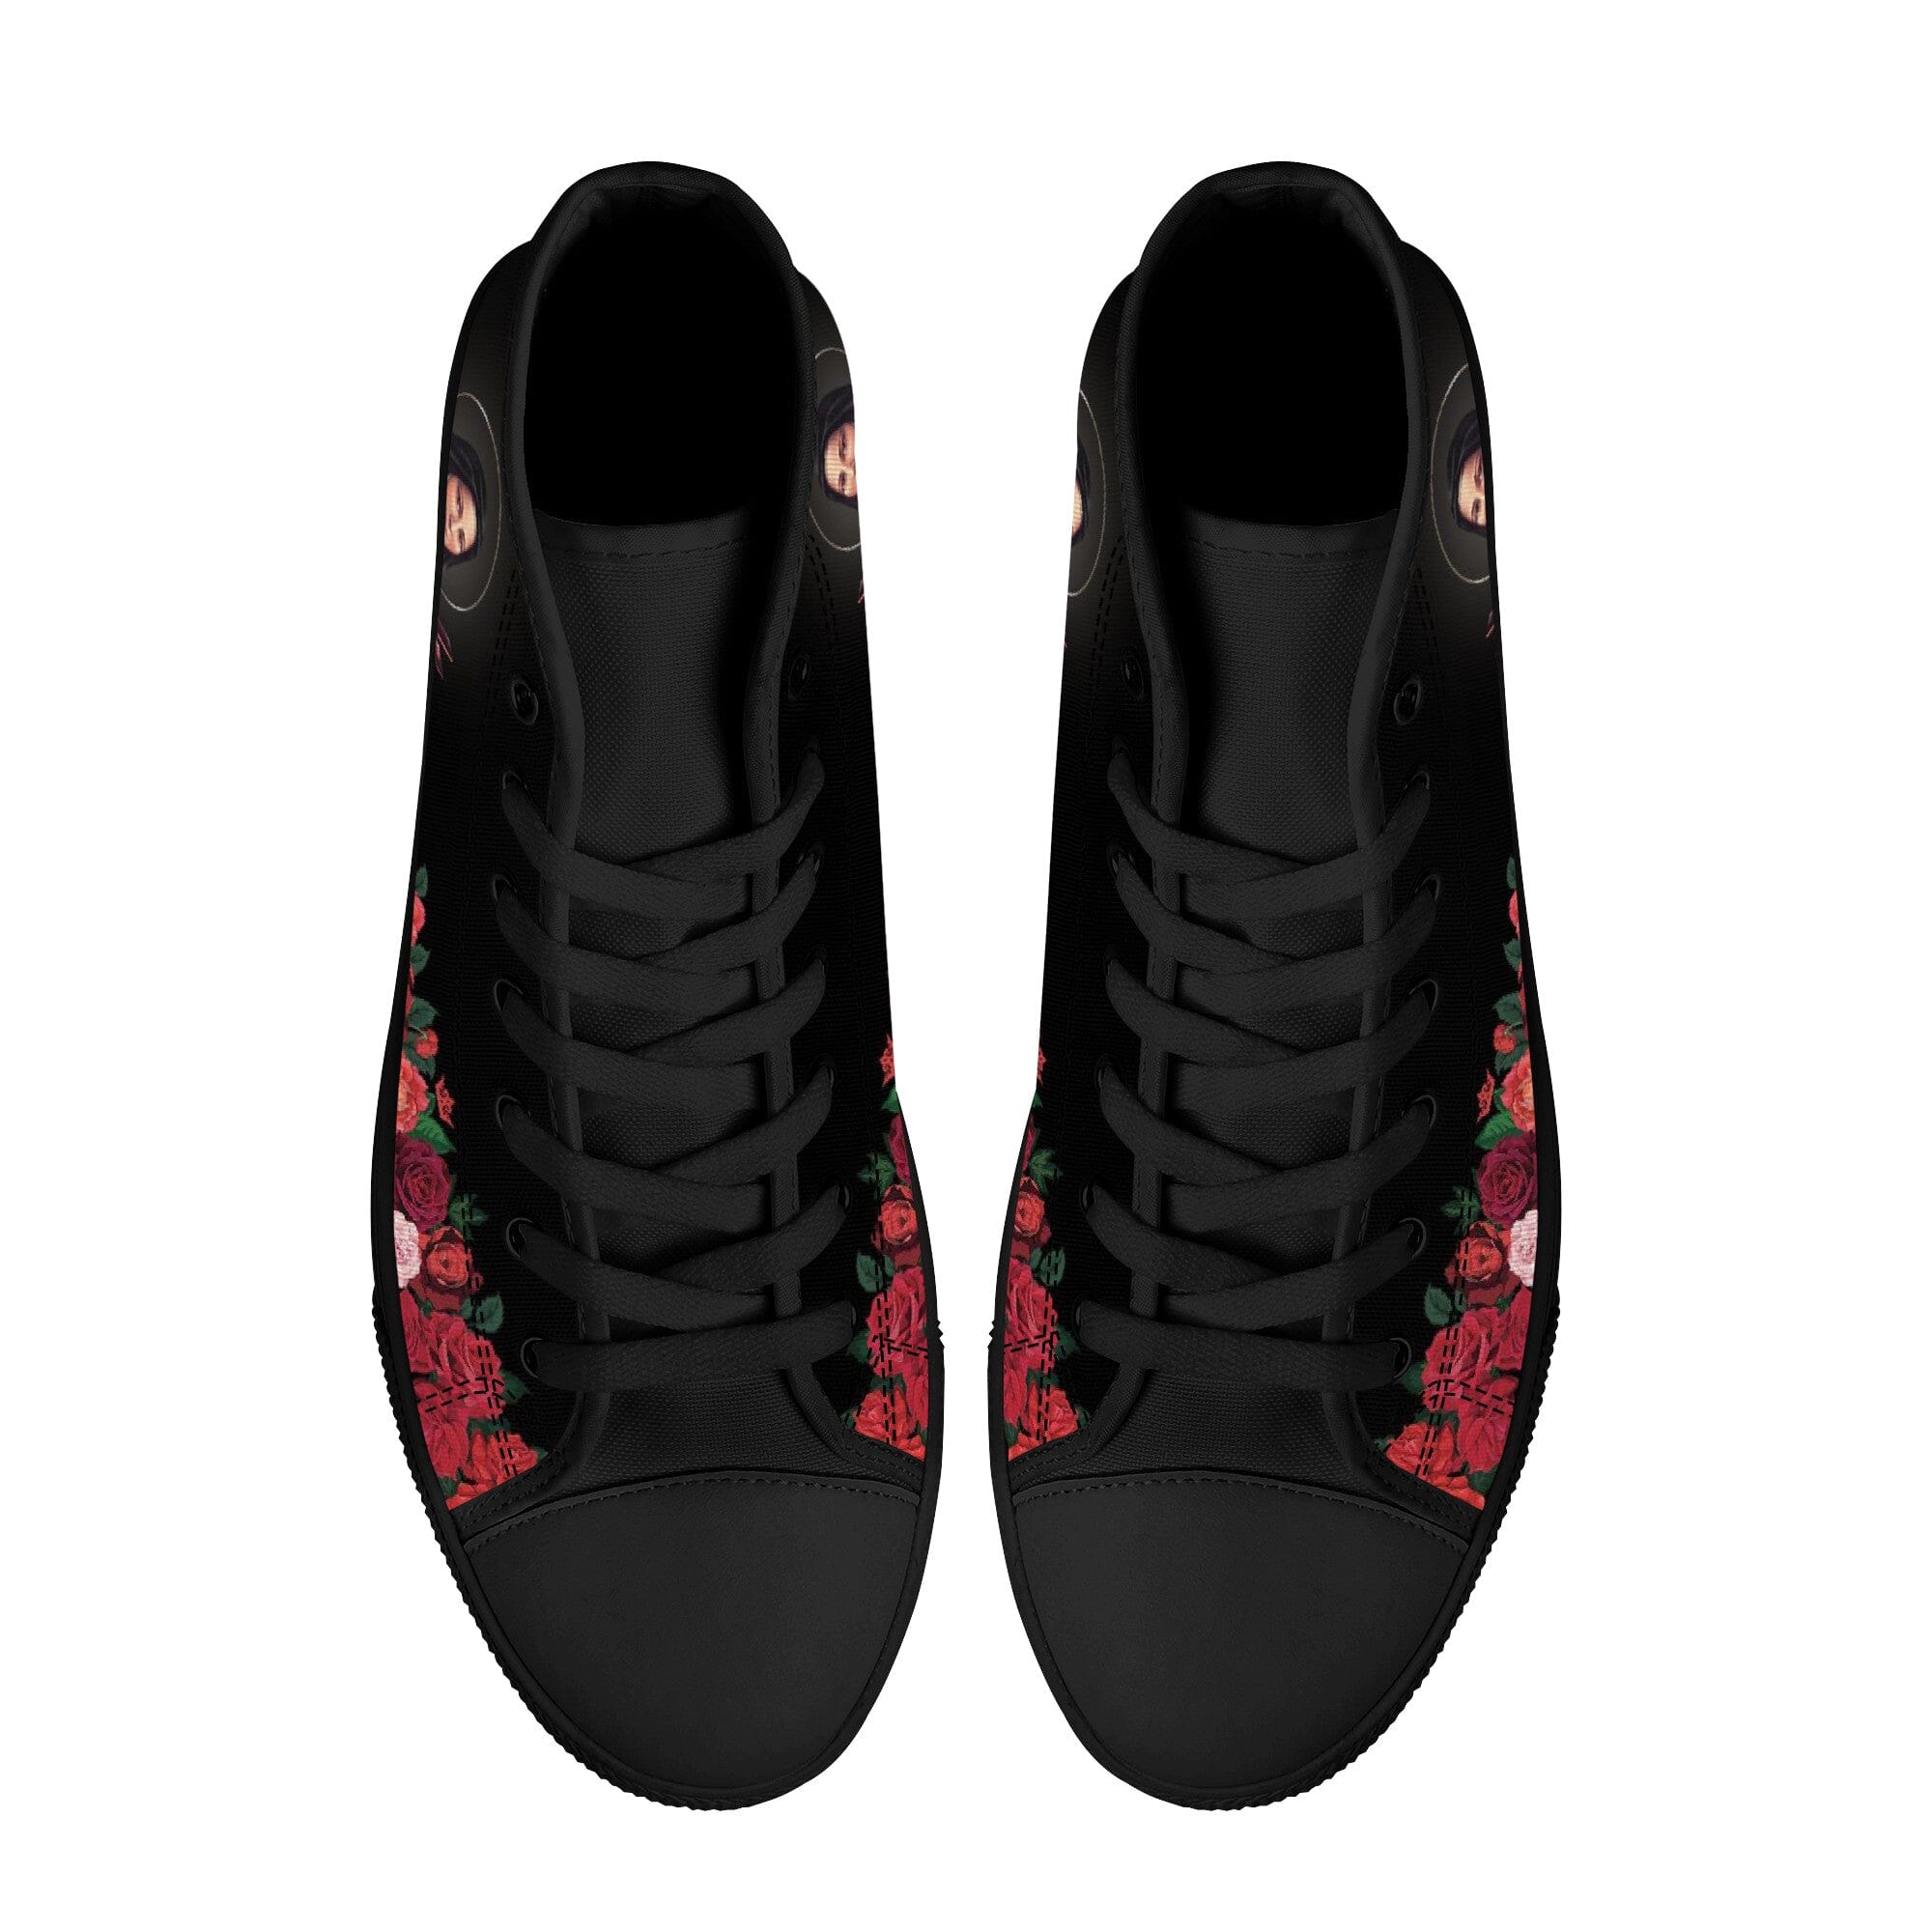 St. Therese of Lisieux Canvas High Top Shoes (Black/Black) - VENXARA®